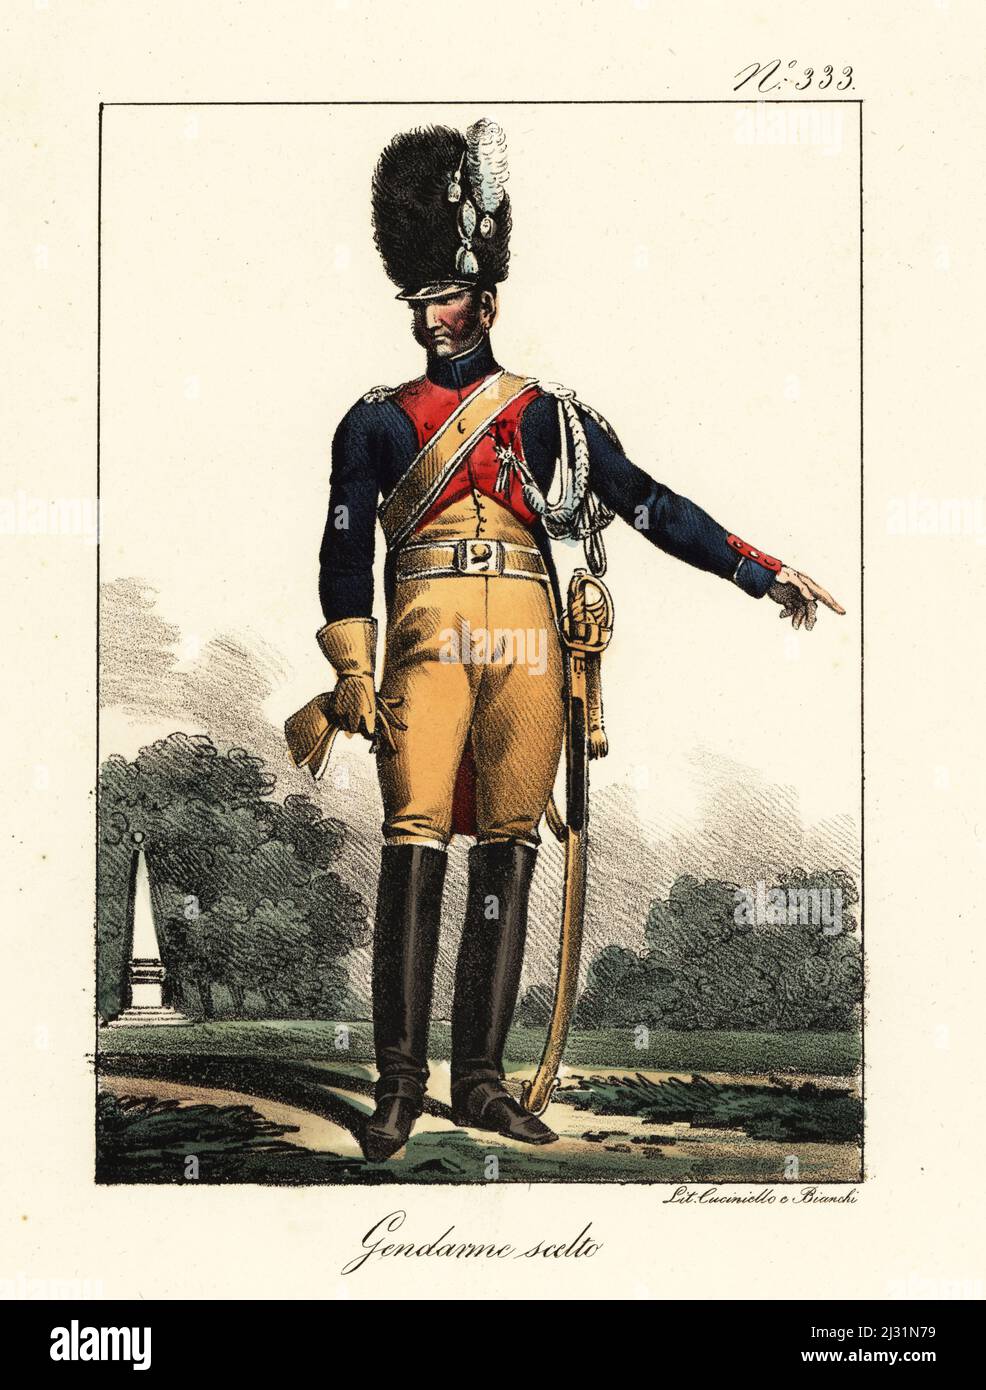 Uniform of the French Elite Gendarmes cavalry regiment, Napoleonic era. In plumed bearskin helmet, blue coat with red lapels, buff breeches, boots, armed with sabre. Gendarme d'Elite, Garde Imperiale. Handcoloured lithograph by Lorenzo Bianchi and Domenico Cuciniello after Hippolyte Lecomte from Costumi civili e militari della monarchia francese dal 1200 al 1820, Naples, 1825. Italian edition of Lecomte’s Civilian and military costumes of the French monarchy from 1200 to 1820. Stock Photo